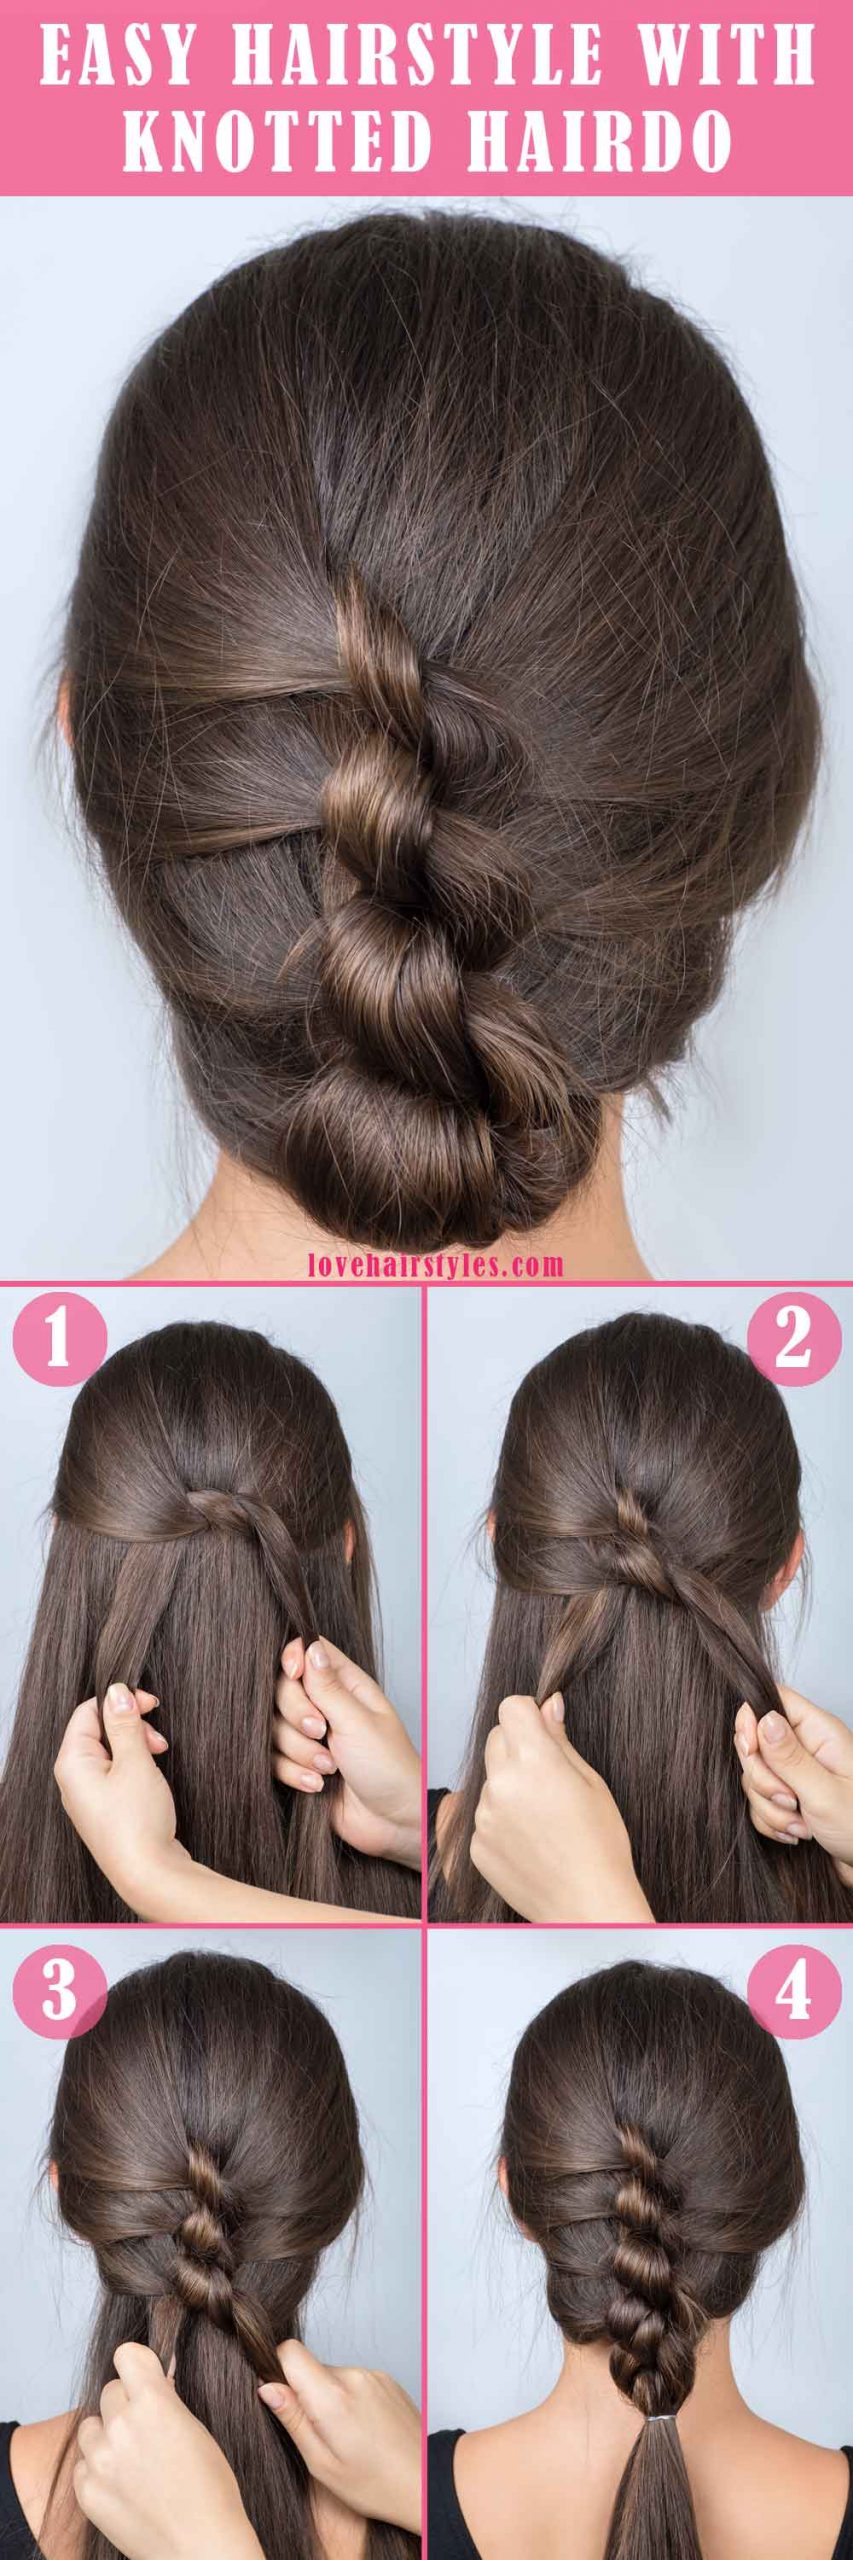 Hairstyles for long hair  10 gorgeous ways to style long hair